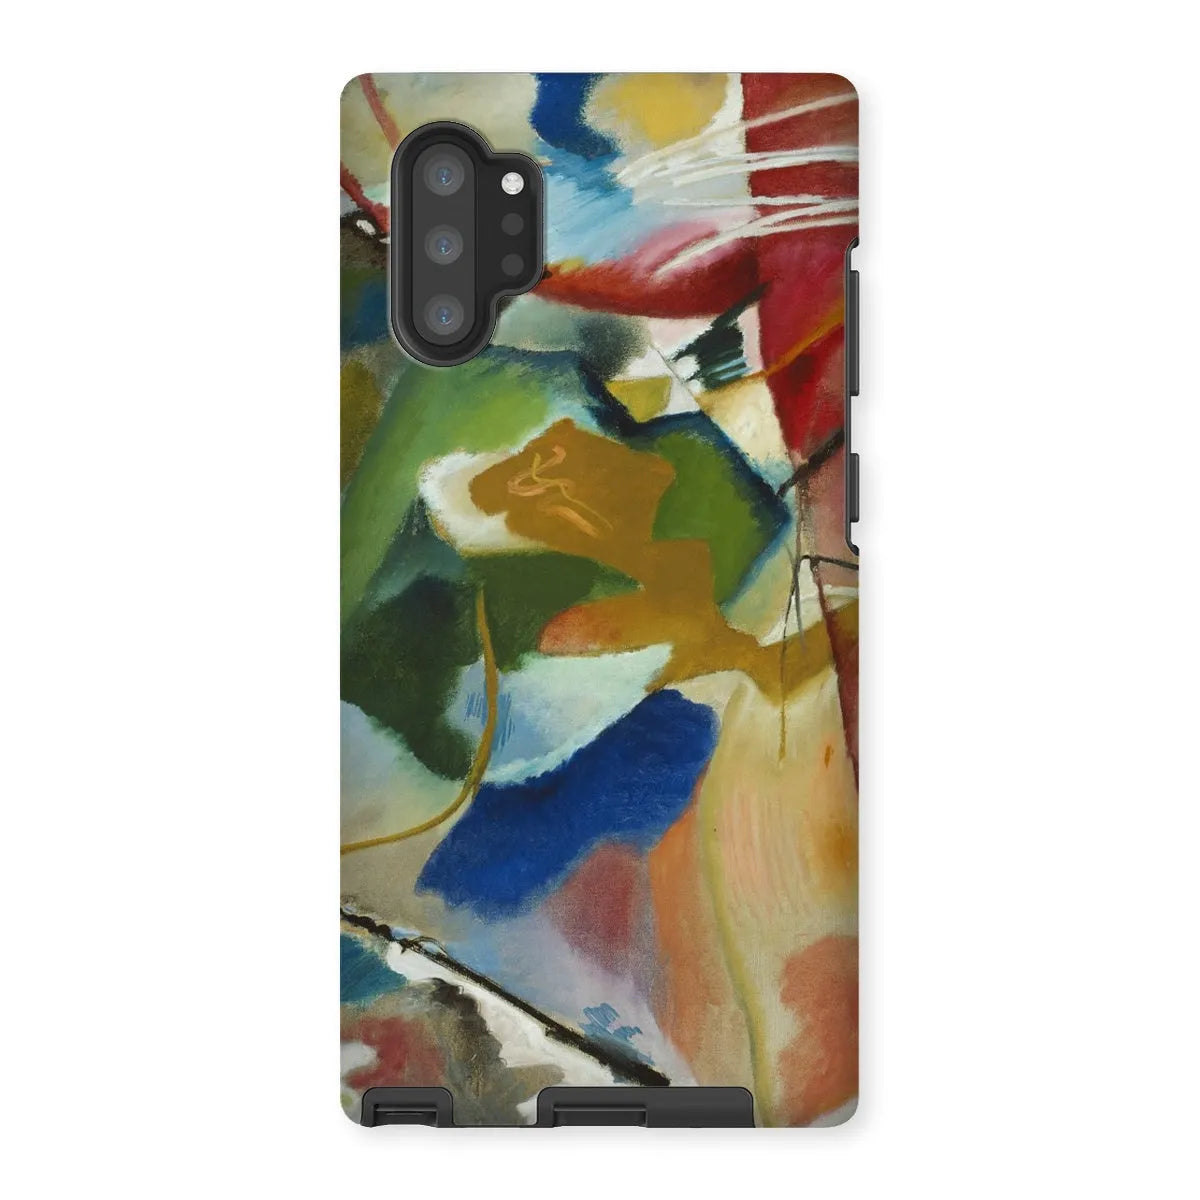 Painting With Green Center Art Phone Case - Wassily Kandinsky - Samsung Galaxy Note 10p / Matte - Mobile Phone Cases